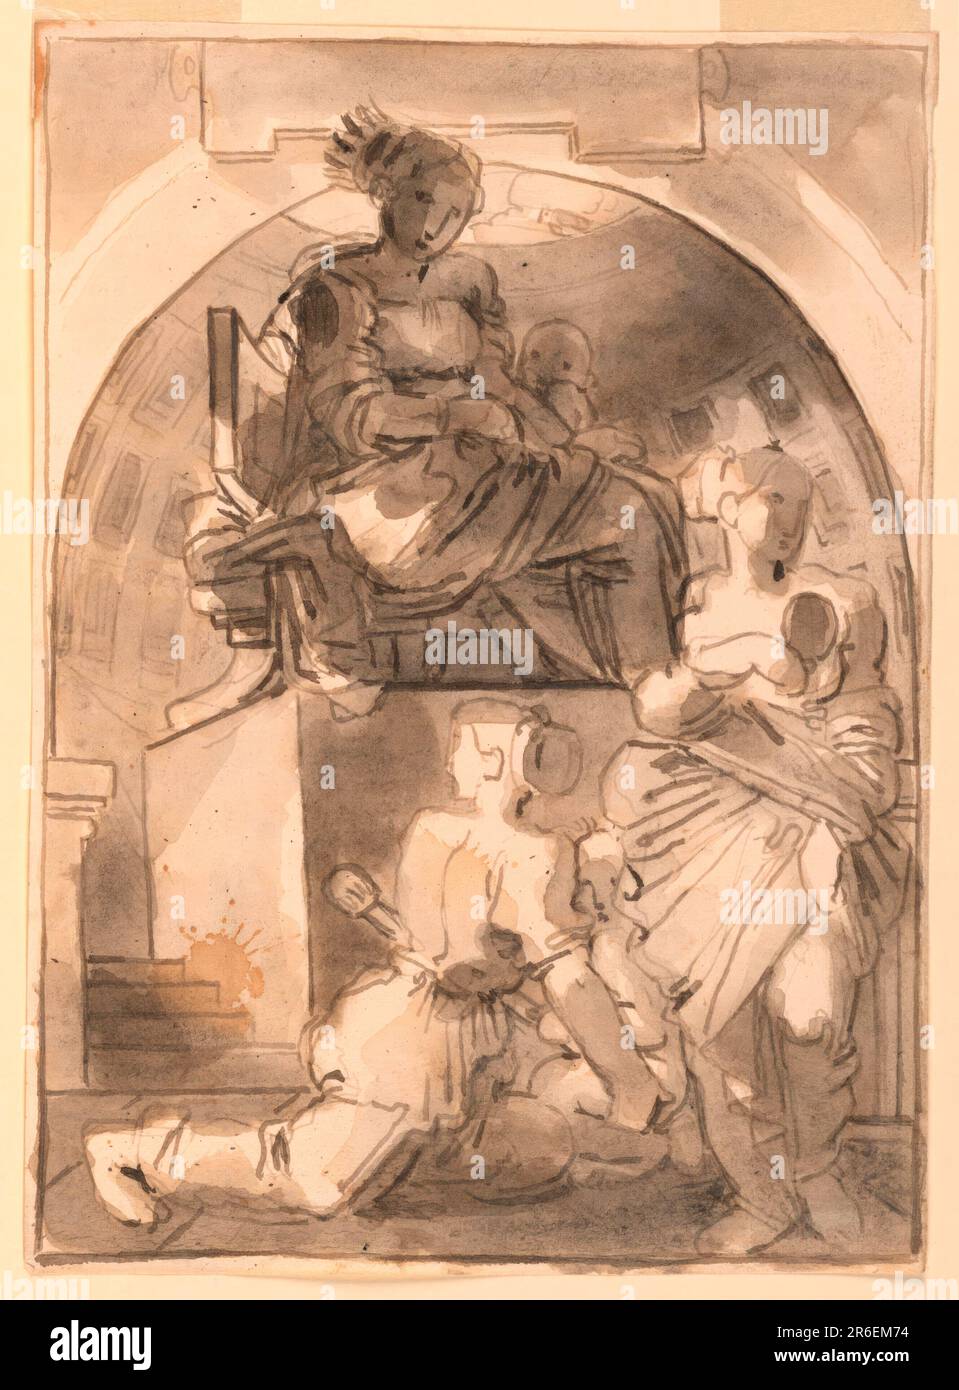 The Virgin and Child enthroned with Worshippers in Classical Interior. Pen and ink, brush and wash on paper. Date: 1820-1850. Museum: Cooper Hewitt, Smithsonian Design Museum. Stock Photo